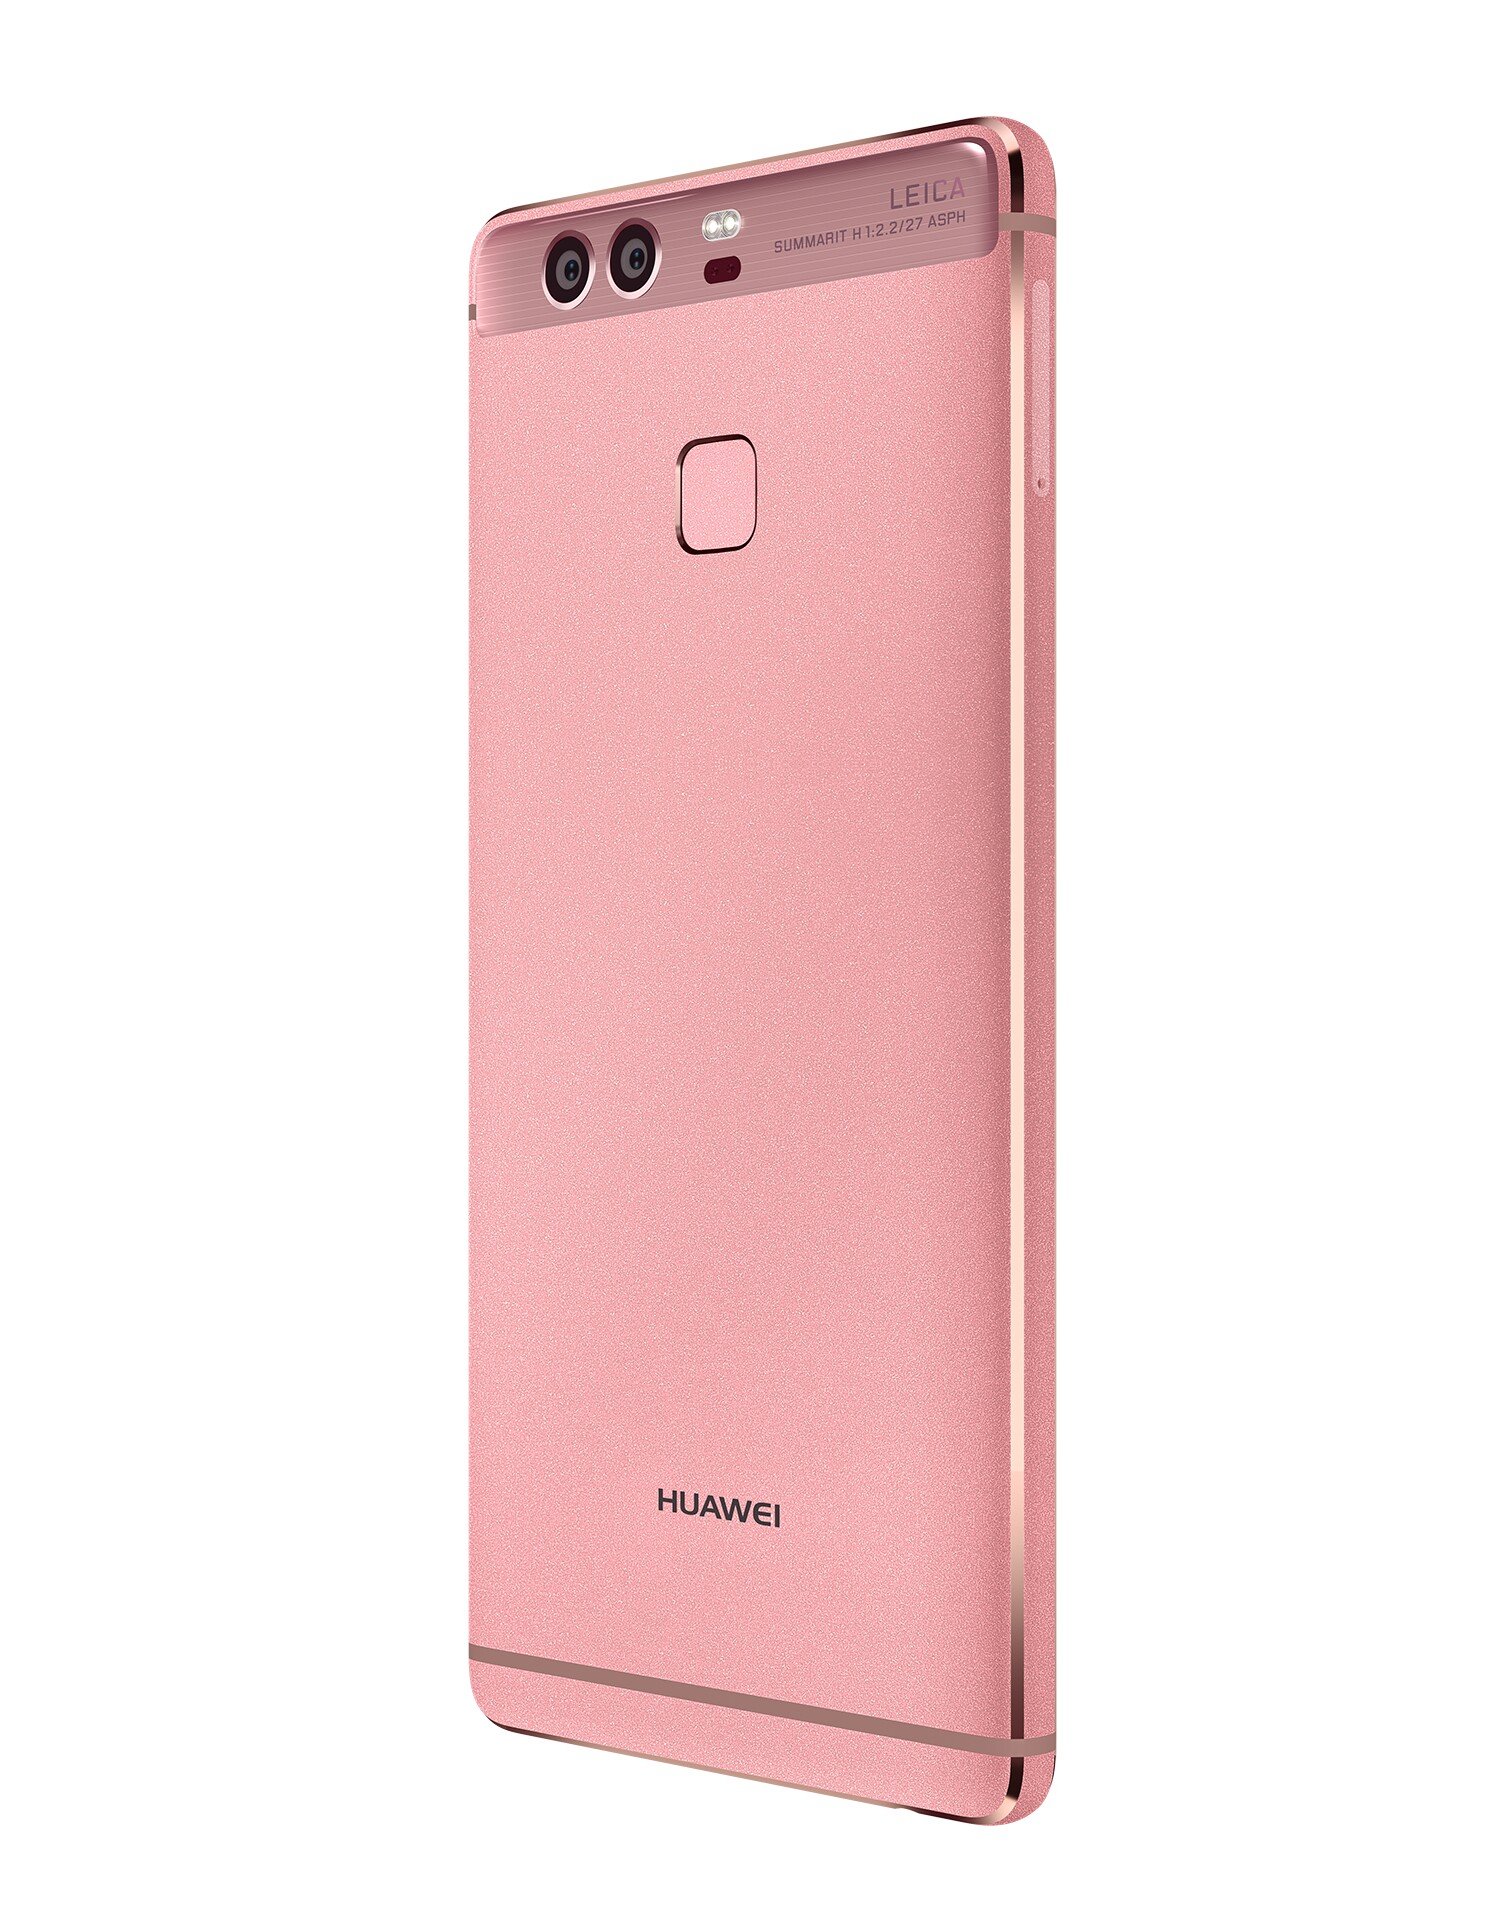 Huawei P9 P9 Plus Officially Announced With 12MP From Leica -